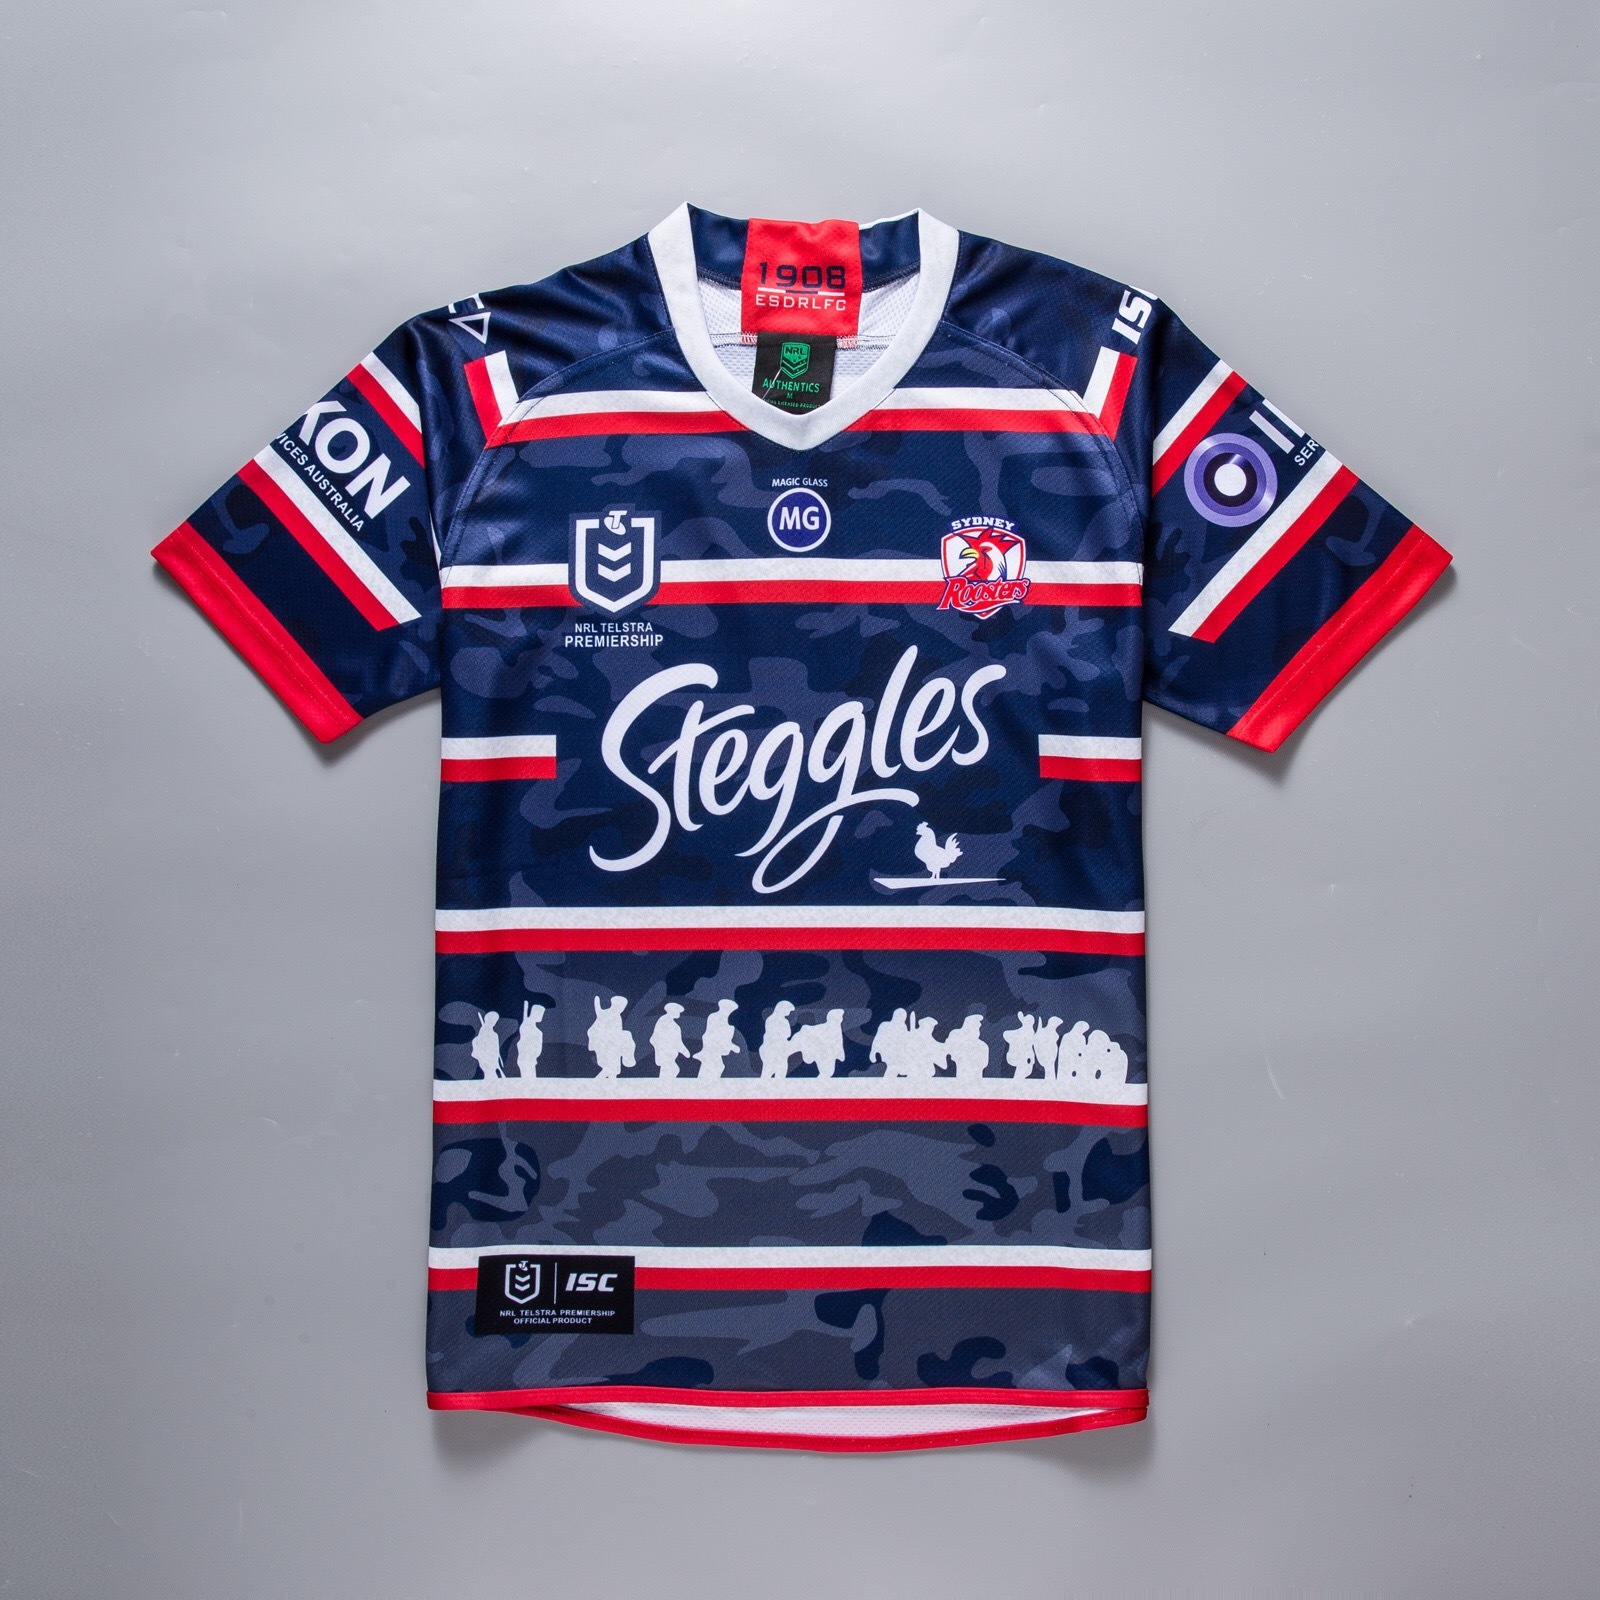 NRL Sydney Roosters 2019 Men's Commemorative Edition Rugby Jersey S-3XL